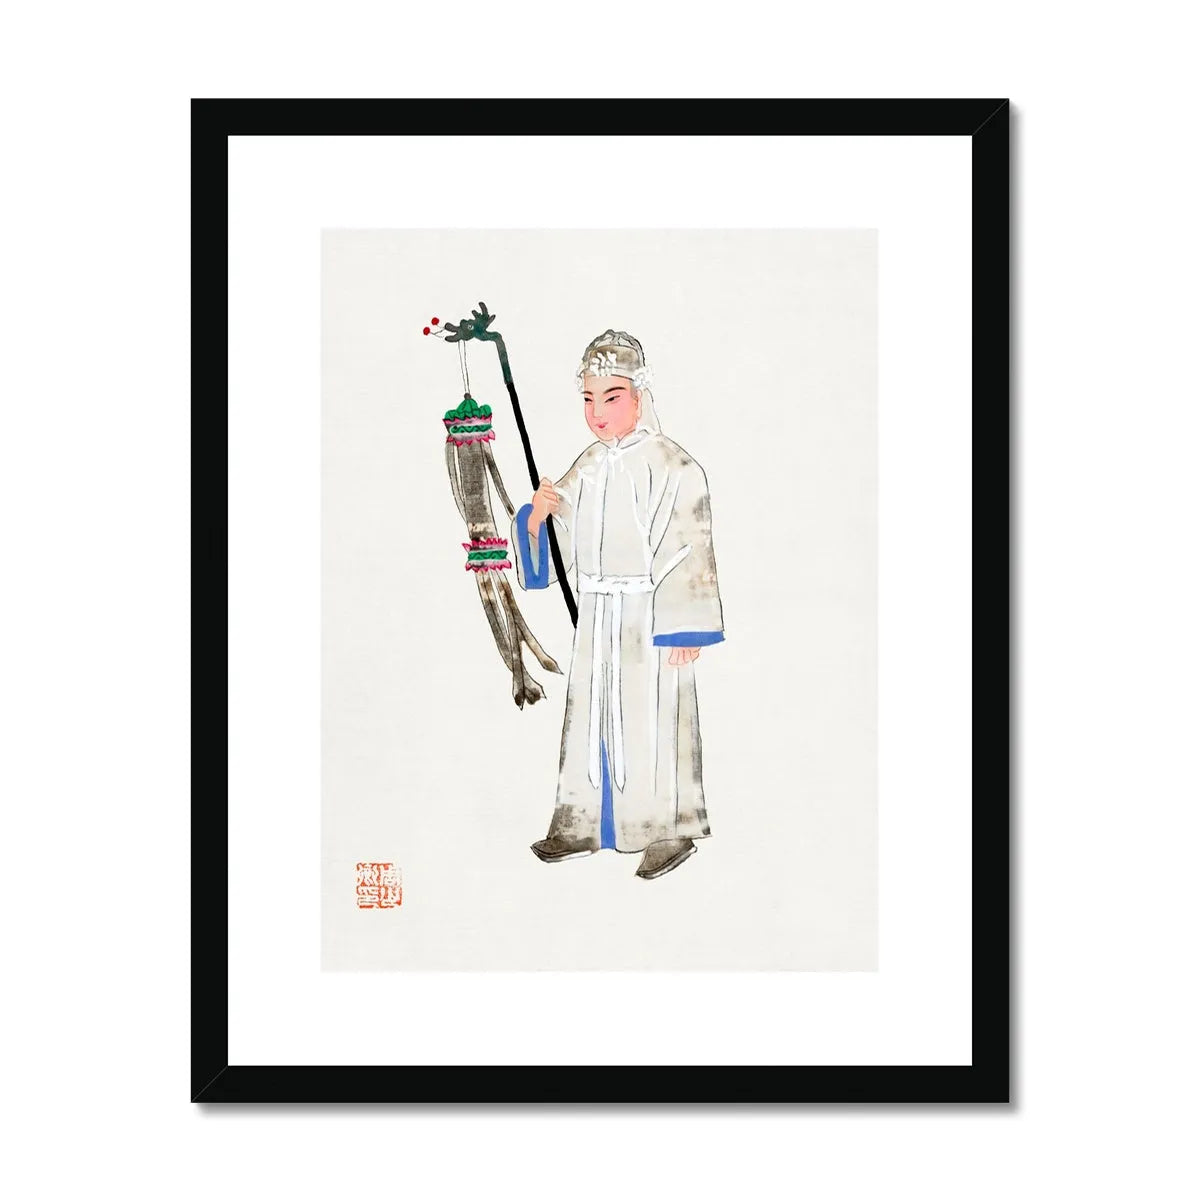 Chinese Man In Mourning Framed & Mounted Print - 16’x20’ / Black Frame - Posters Prints & Visual Artwork - Aesthetic Art